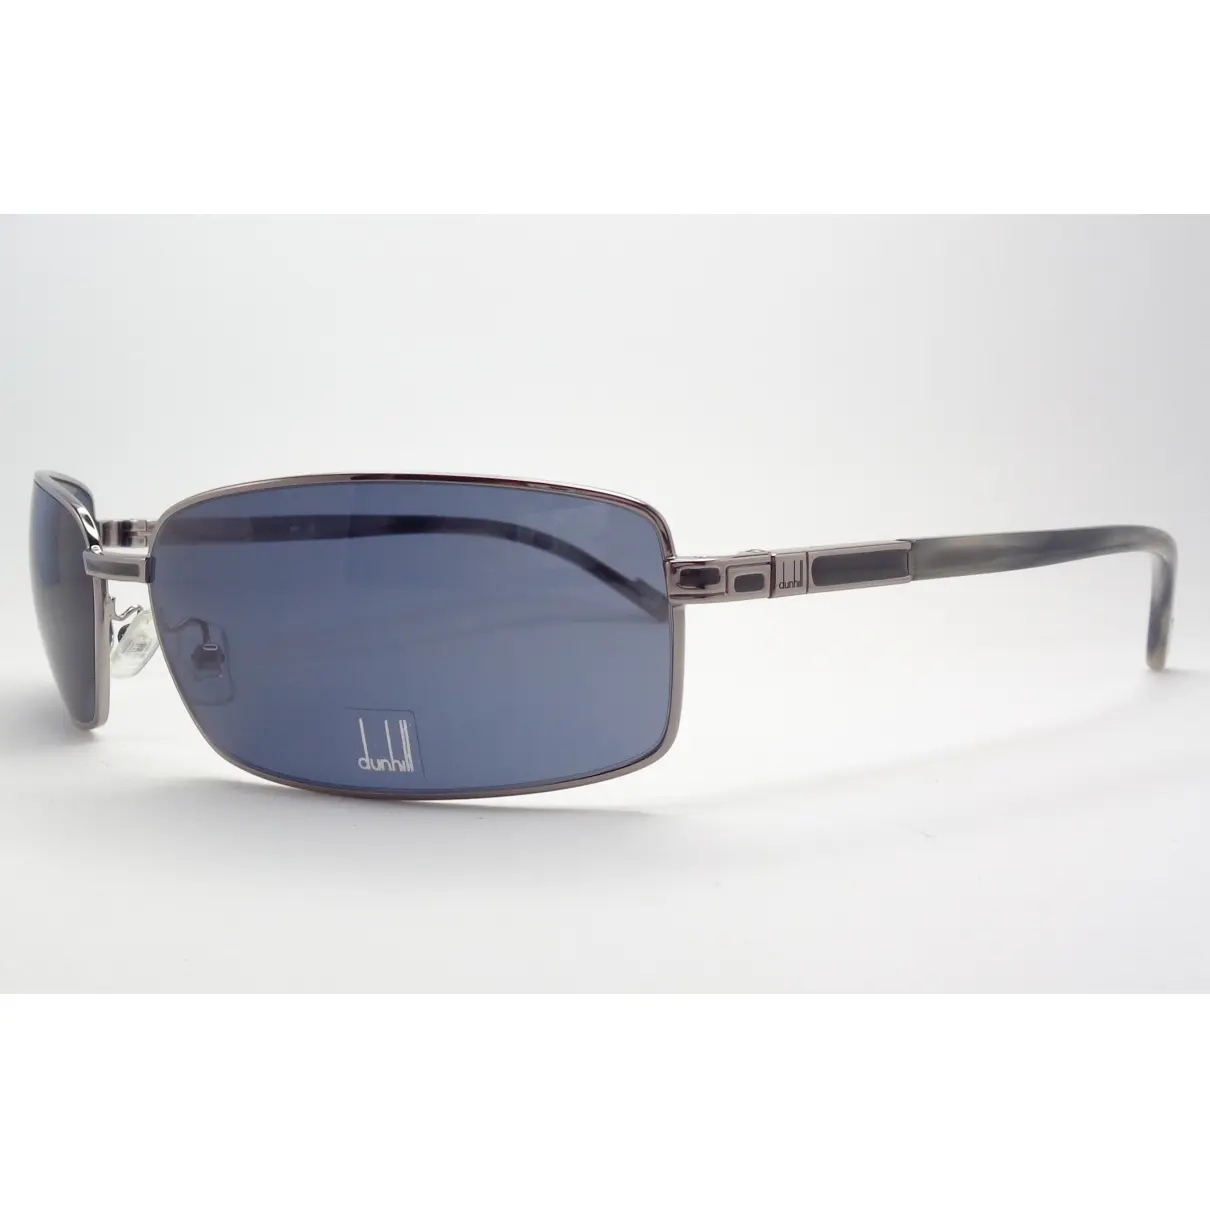 Buy Alfred Dunhill Sunglasses online